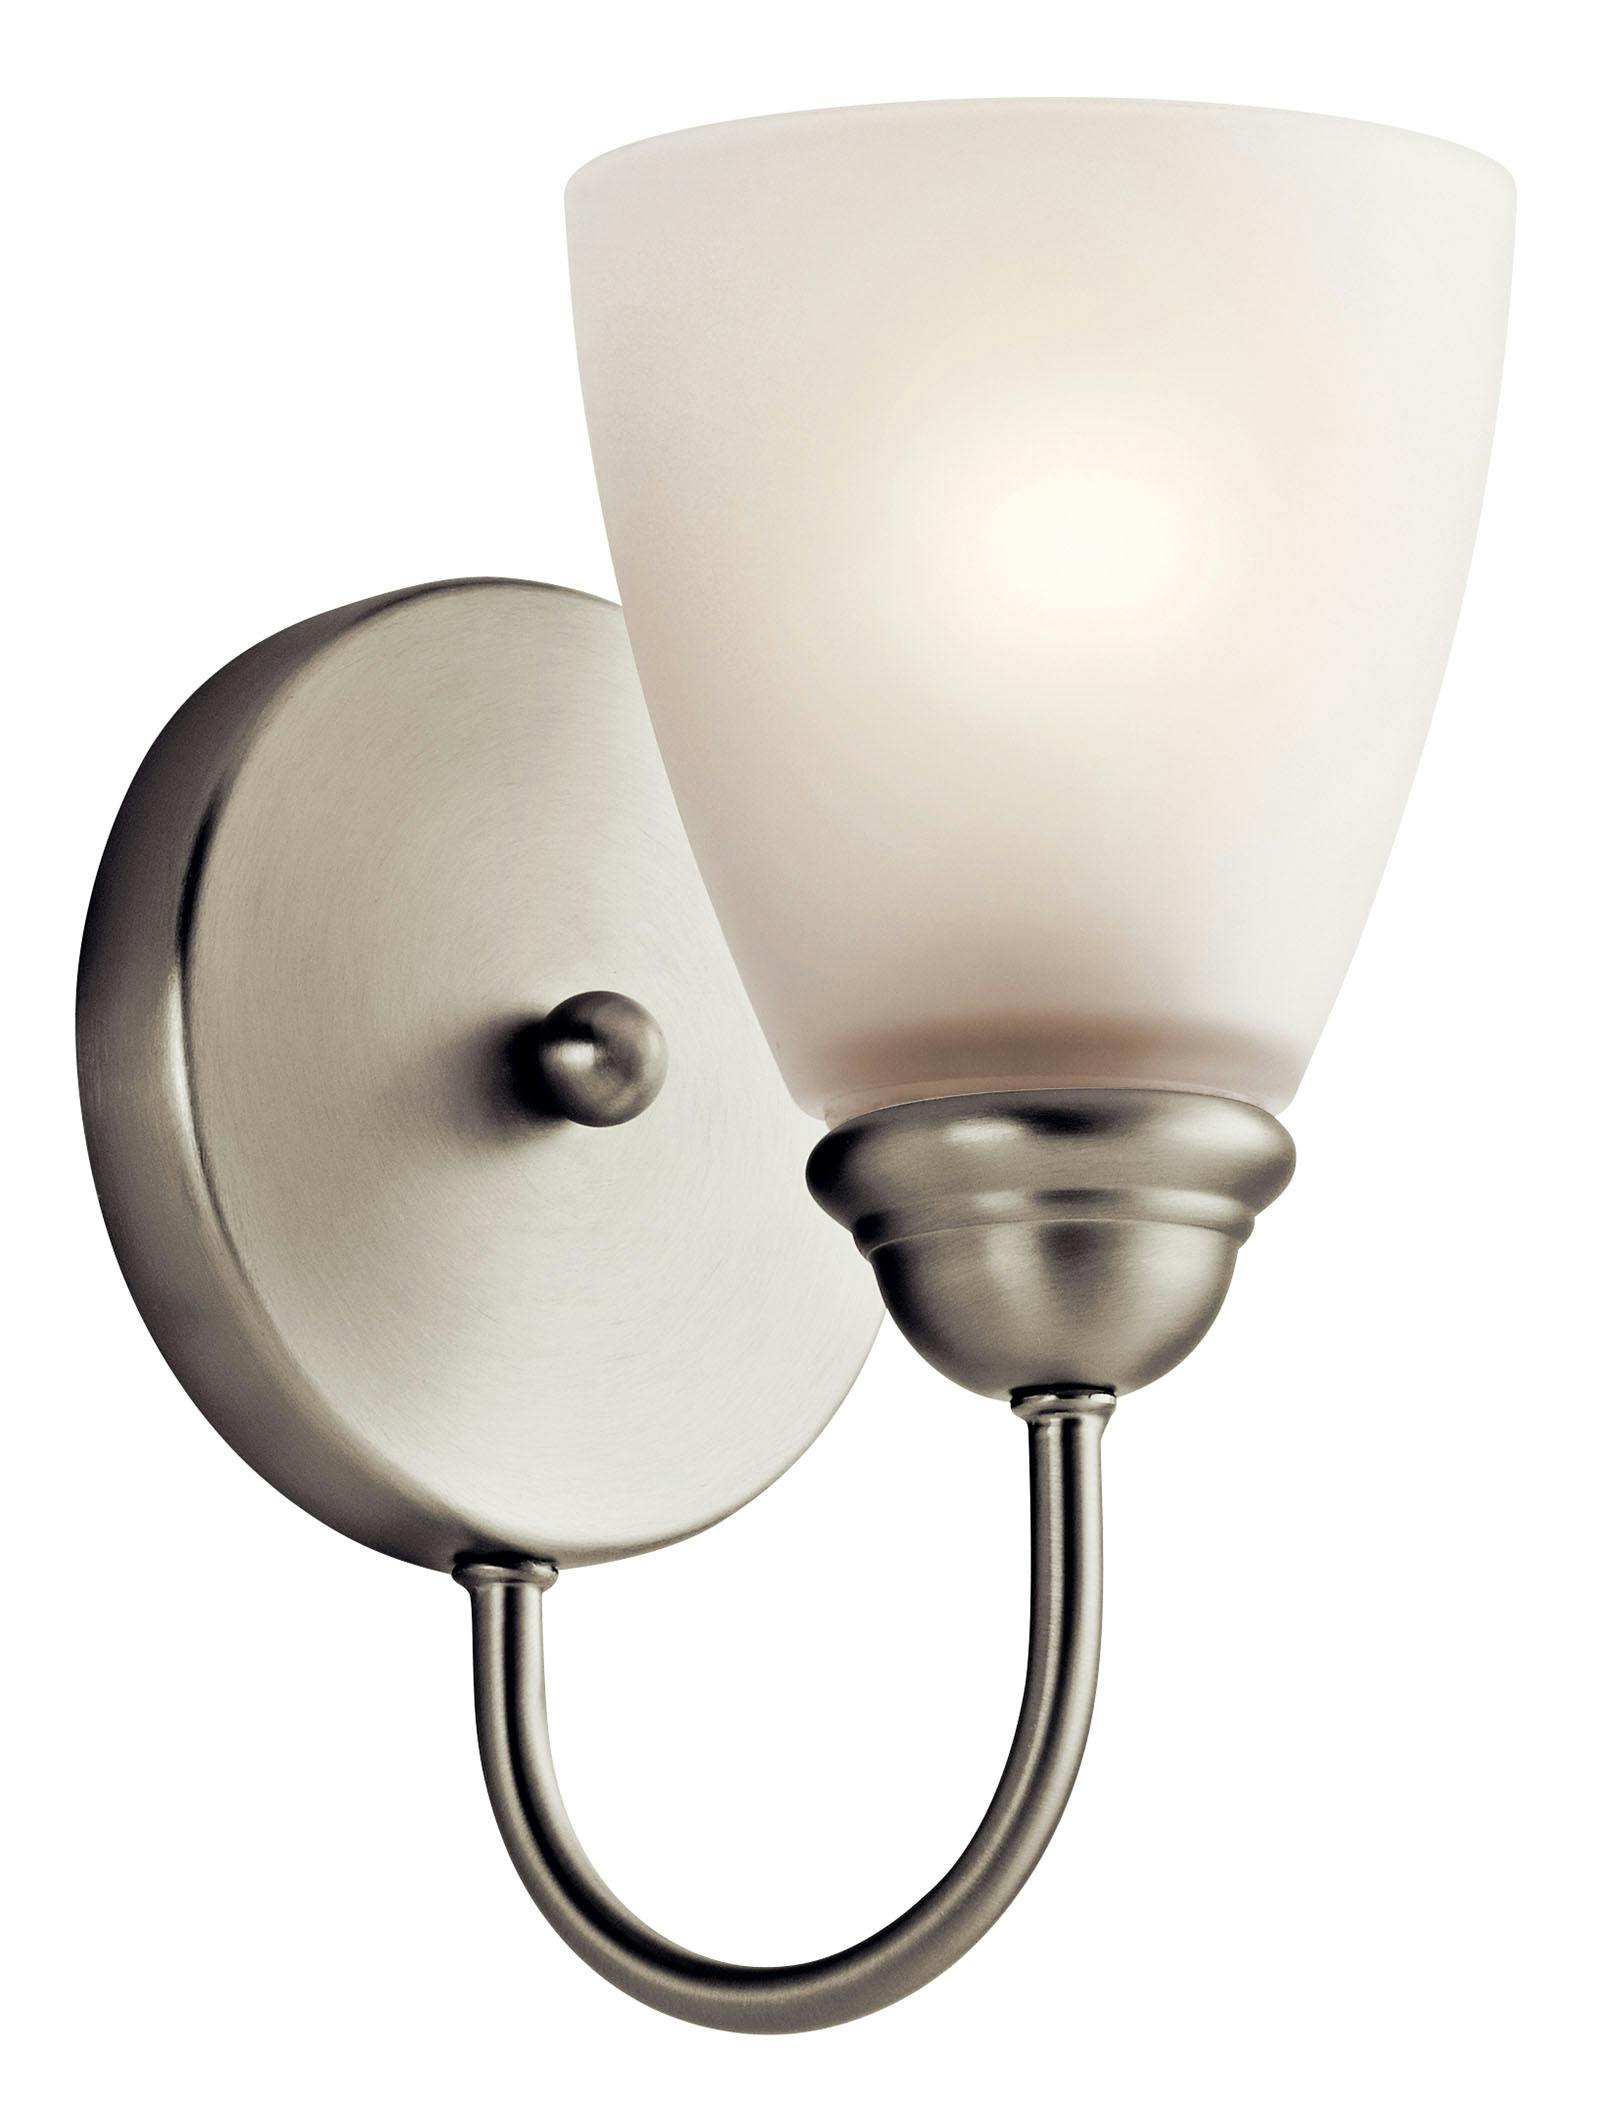 Jolie 1 Light Wall Sconce Brushed Nickel on a white background